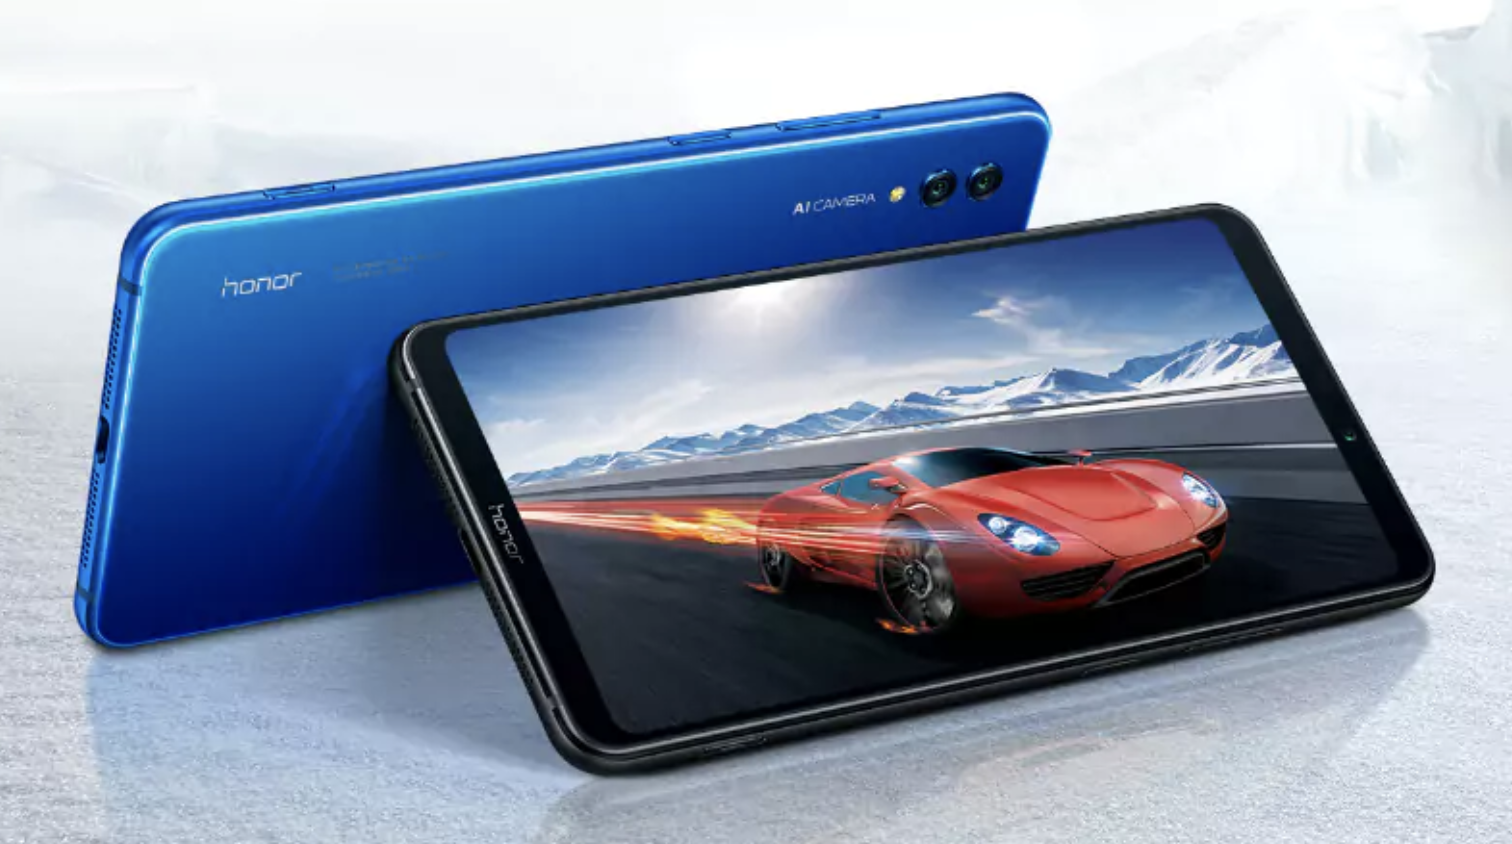 The display on the Honor Note 10 is a 6.95-inch full-HD+ AMOLED. (Picture: Honor)